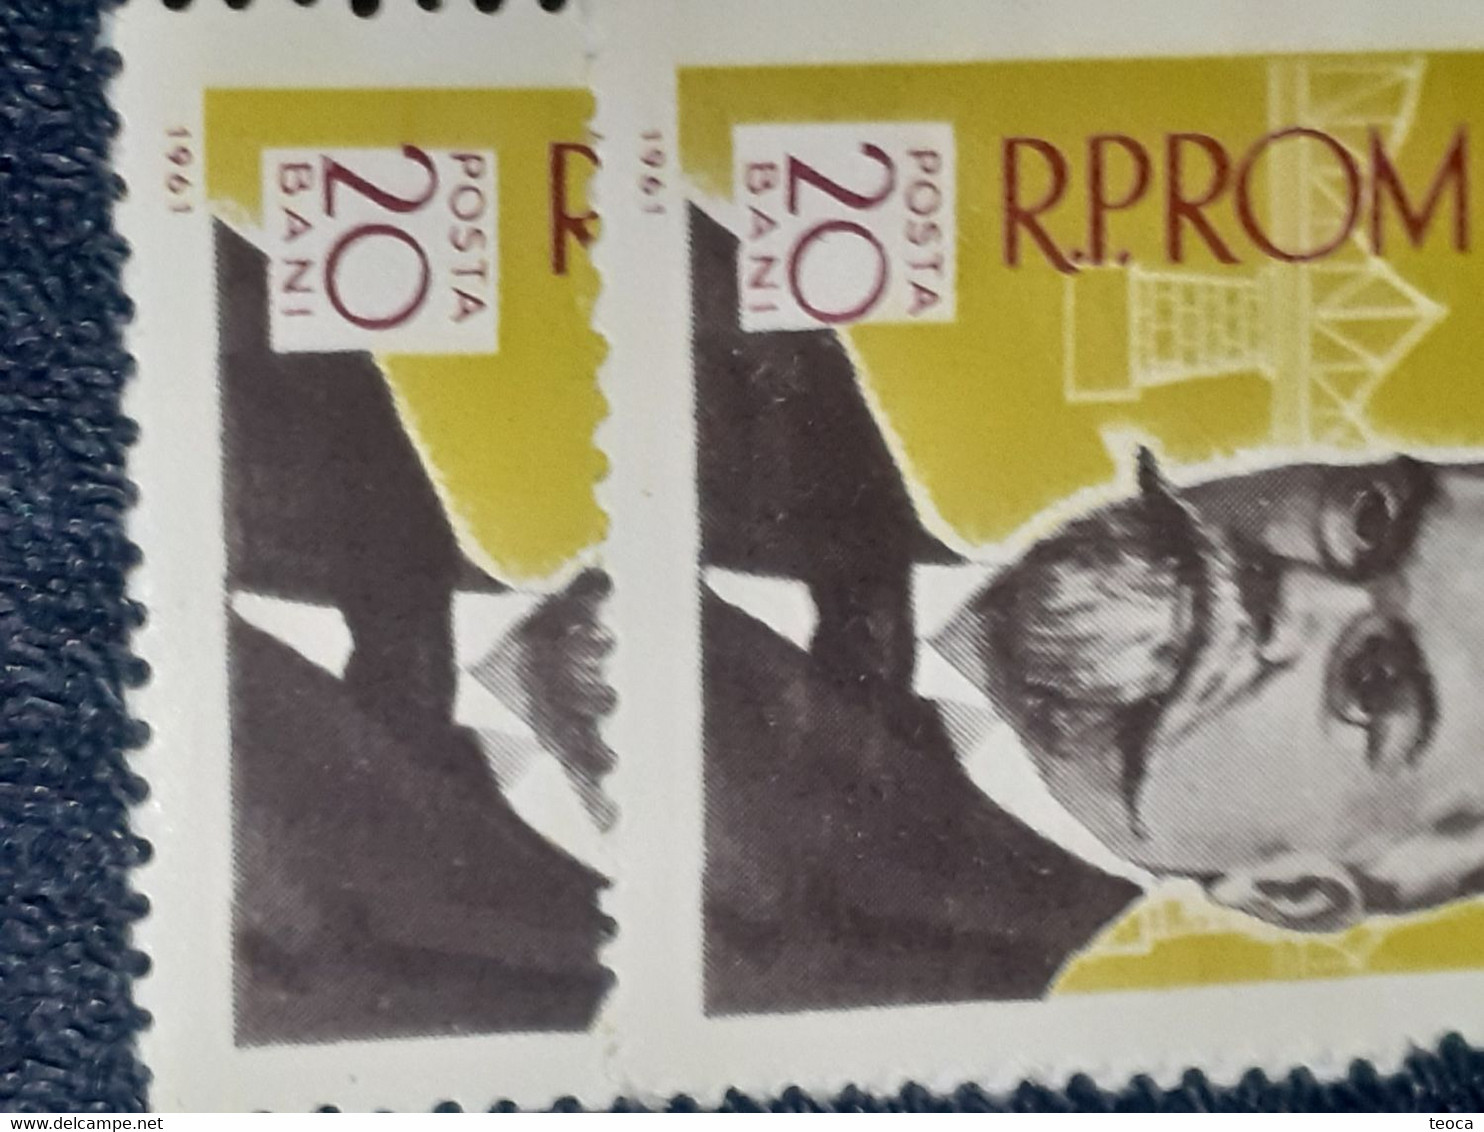 Errors Romania 1961 # Mi 1959 Anghel Saligny, Printed With Numbers And Letter Shifted Left And Right See Image - Variétés Et Curiosités